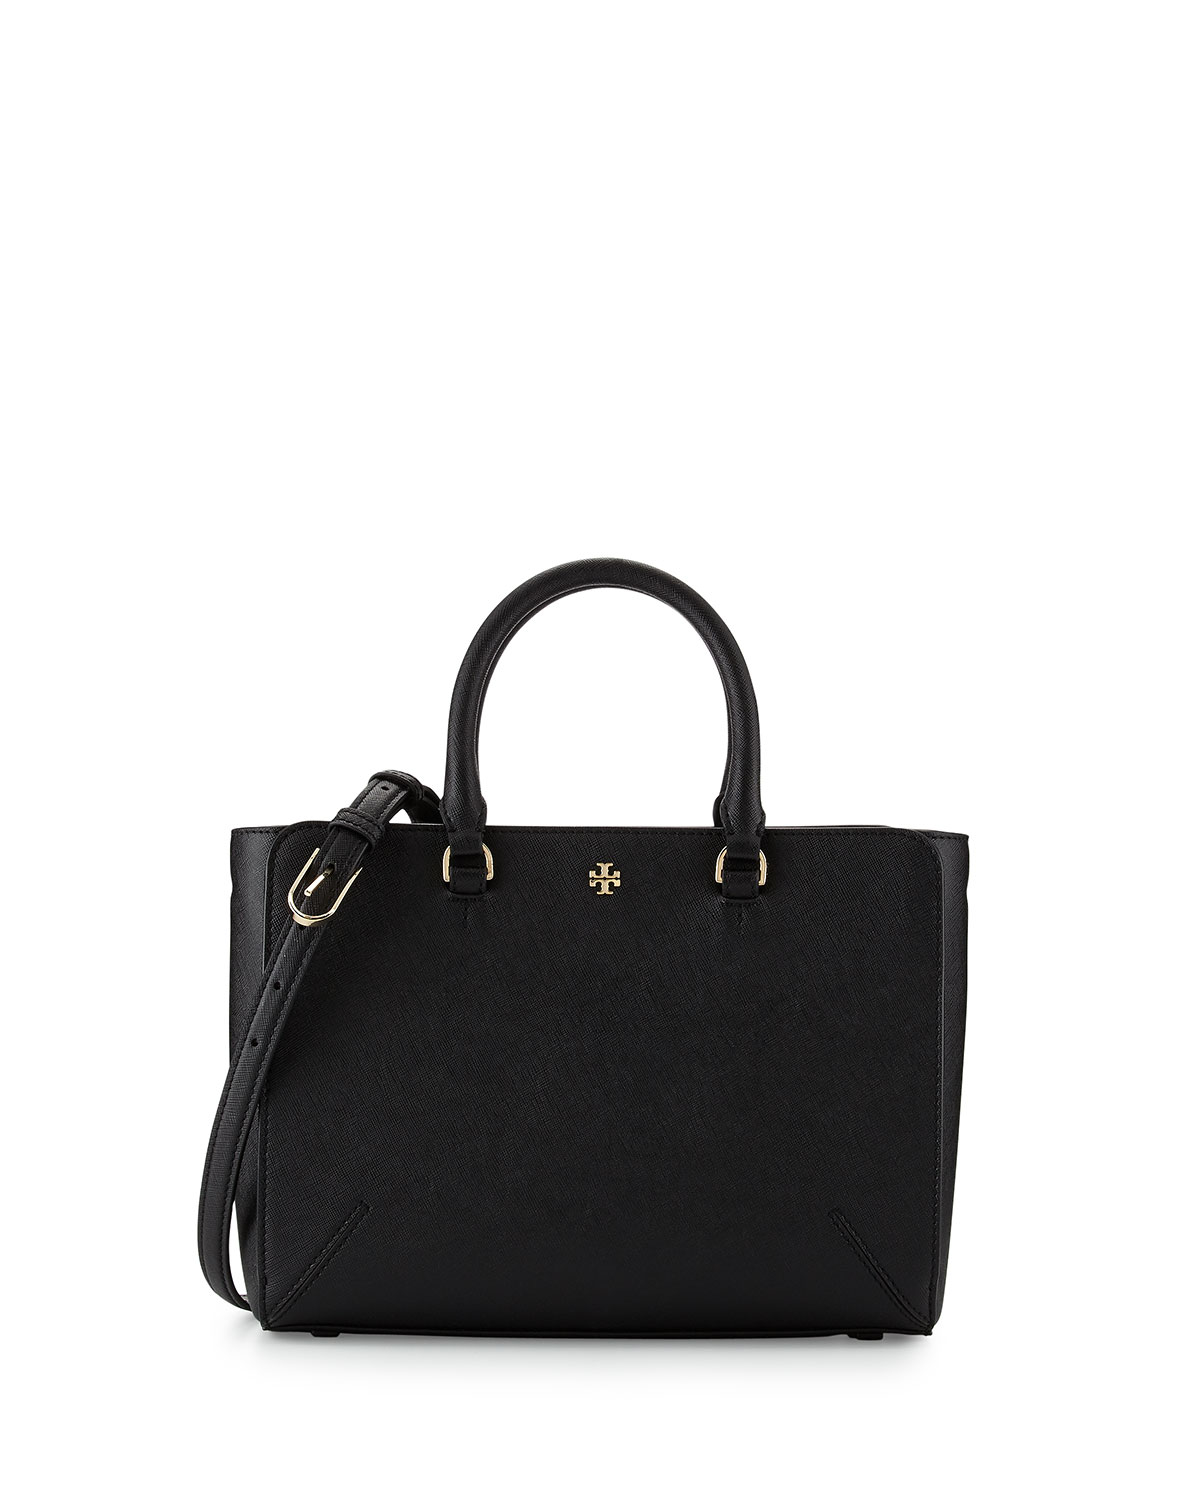 Tory burch Robinson Small Zip Tote Bag in Black | Lyst